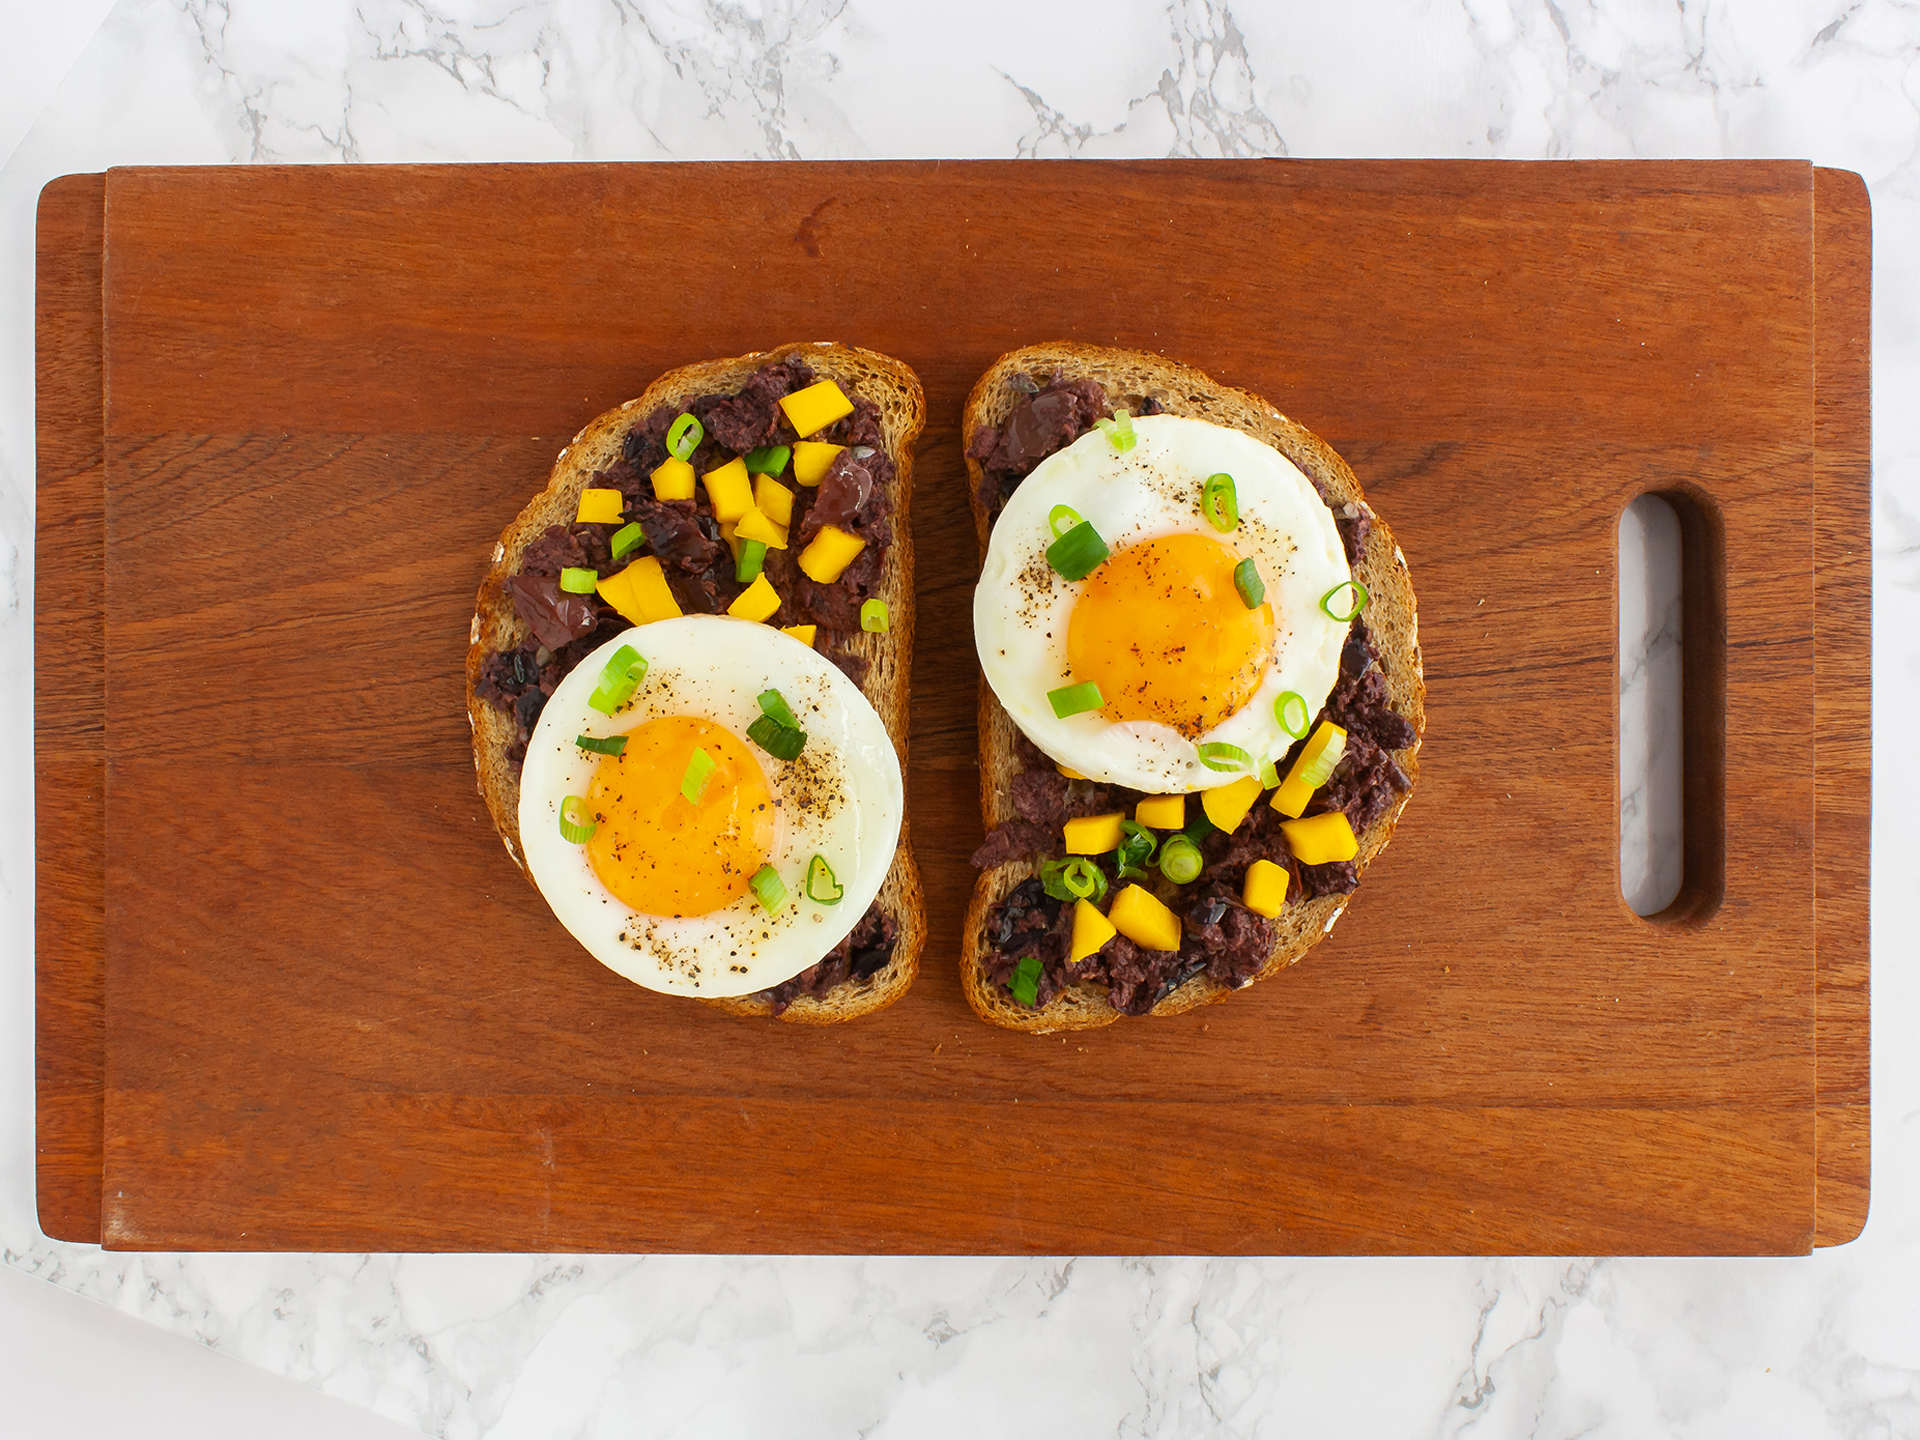 Step 3.2 of Olive Tapenade Bruschetta With Mango and Eggs